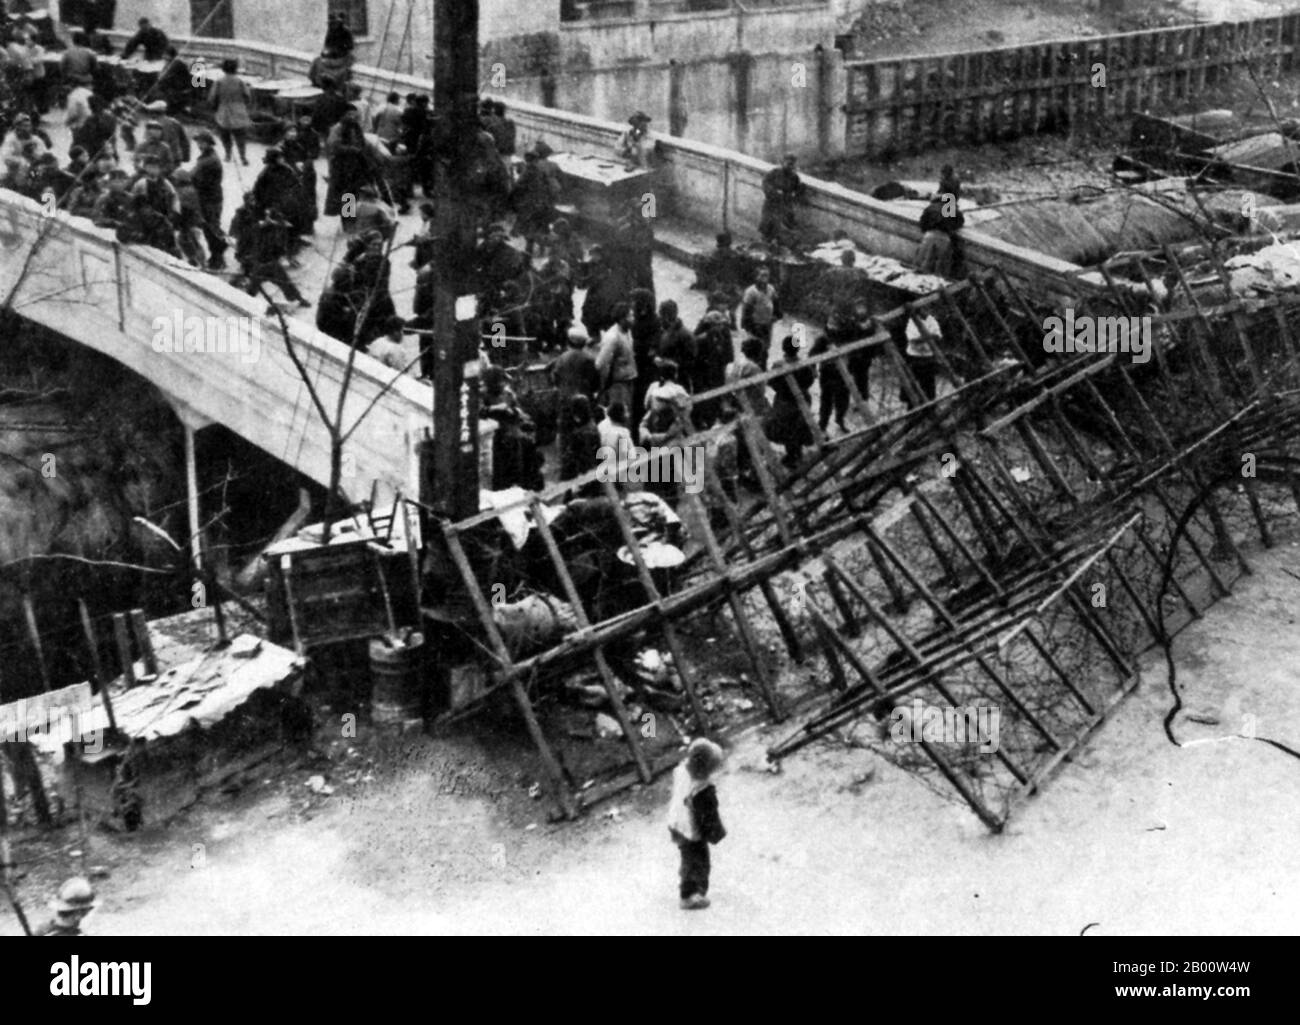 China: A barricade hastily erected by the British at the Shanghai  International Settlement during the Japanese invasion of Shanghai in 1937.  Following the Marco Polo Bridge Incident in July 1937, the Battle